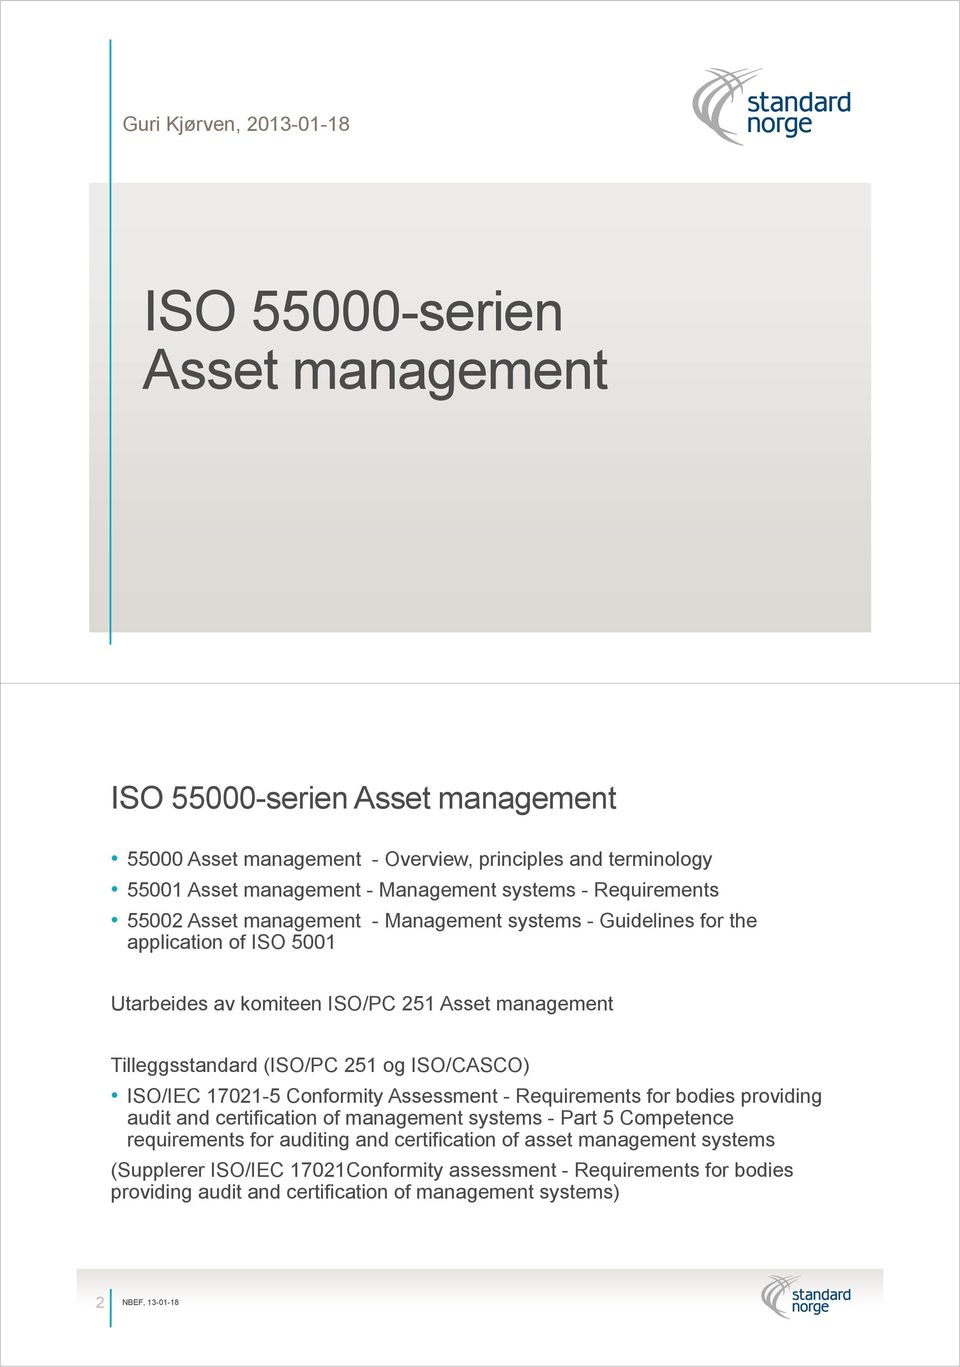 Tilleggsstandard (ISO/PC 251 og ISO/CASCO) ISO/IEC 17021-5 Conformity Assessment - Requirements for bodies providing audit and certification of management systems - Part 5 Competence